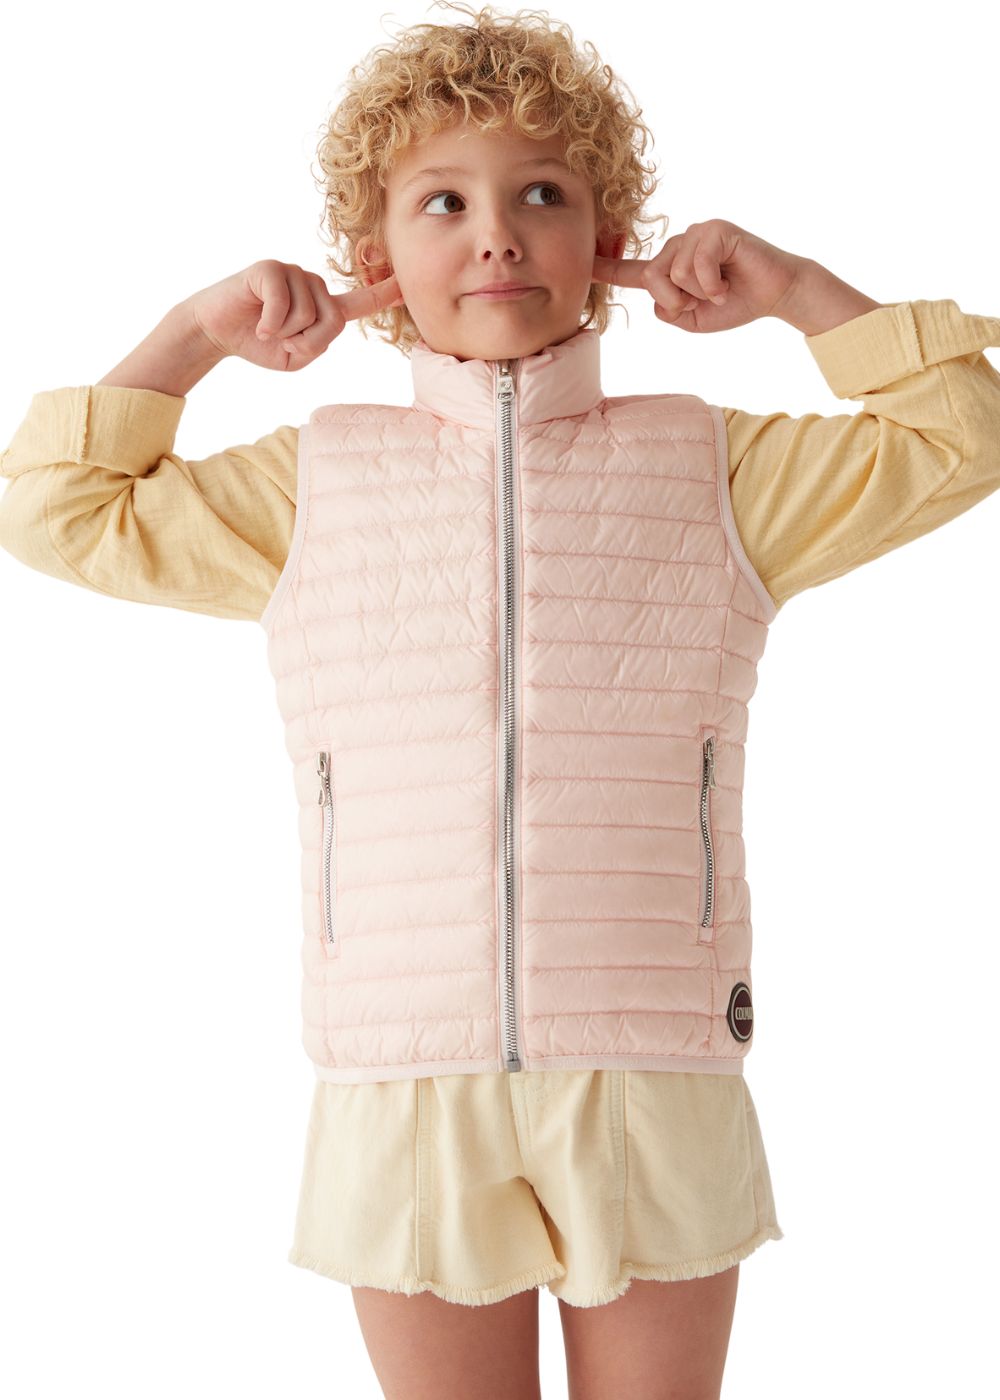 Featured image for “Colmar Gilet In Piumino”